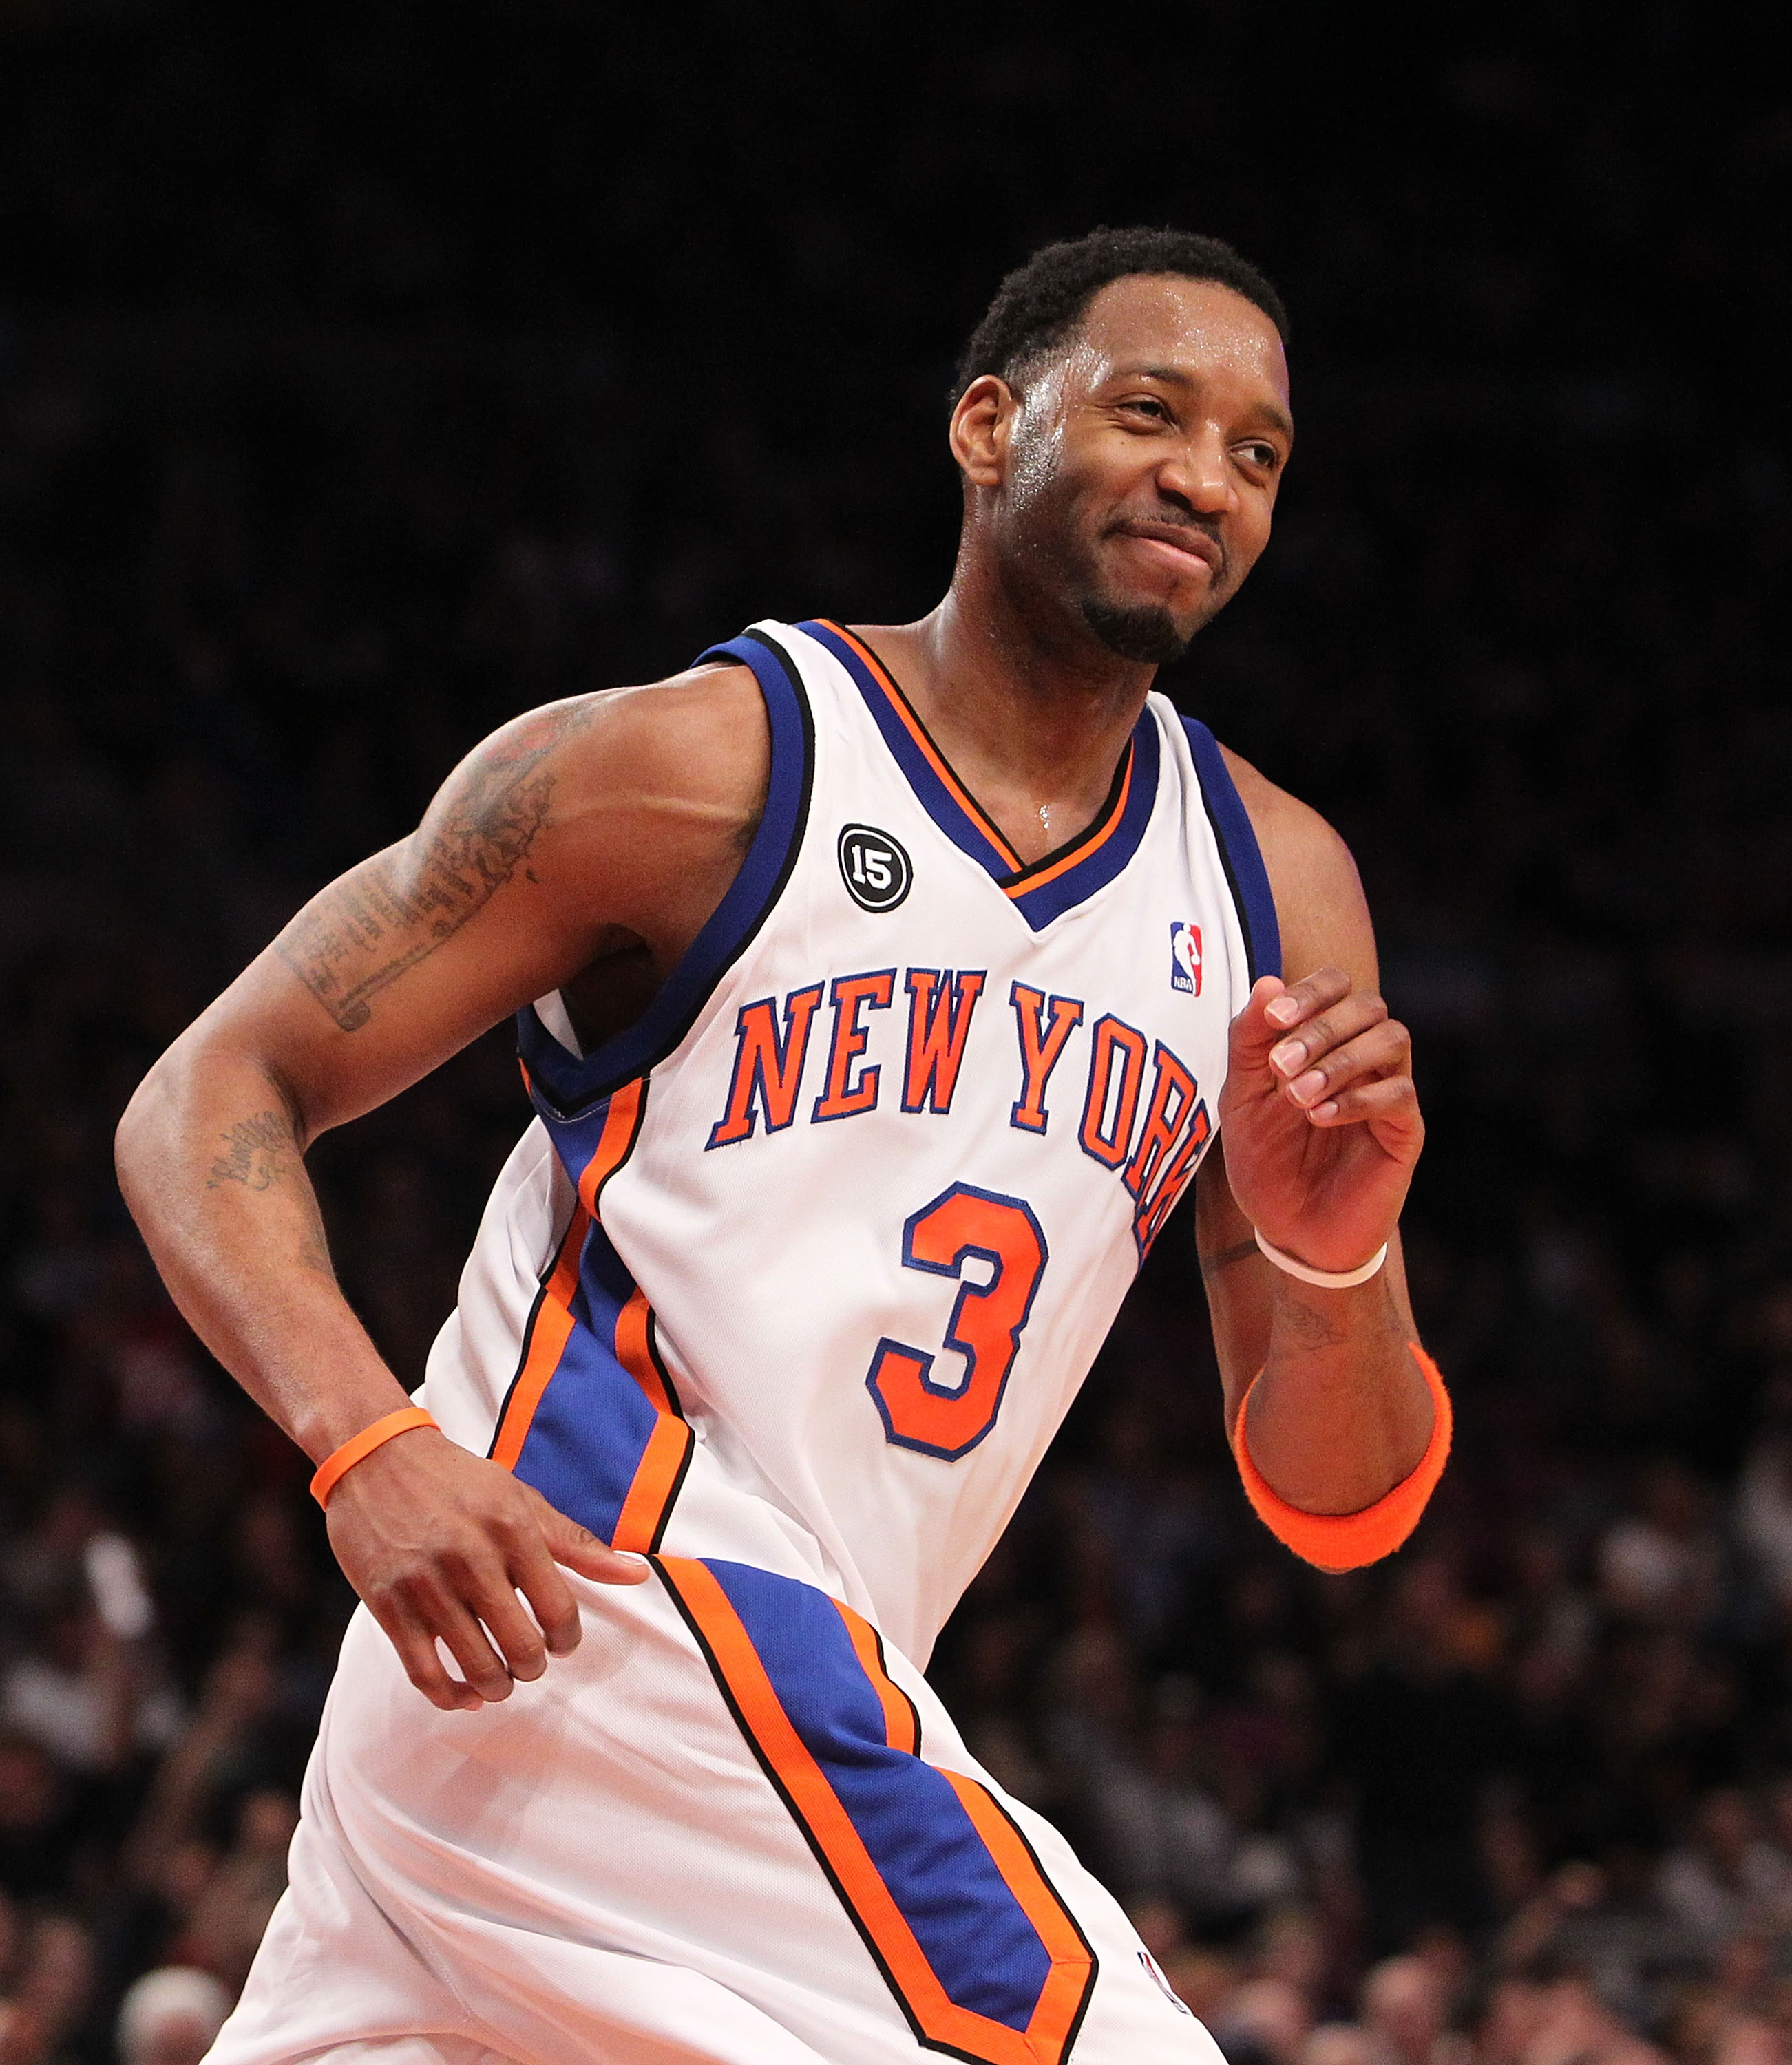 NEW YORK - FEBRUARY 20:  Tracy McGrady #3 of the New York Knicks smiles after making a basket against the Oklahoma City Thunder at Madison Square Garden on February 20, 2010 in New York, New York. NOTE TO USER: User expressly acknowledges and agrees that,